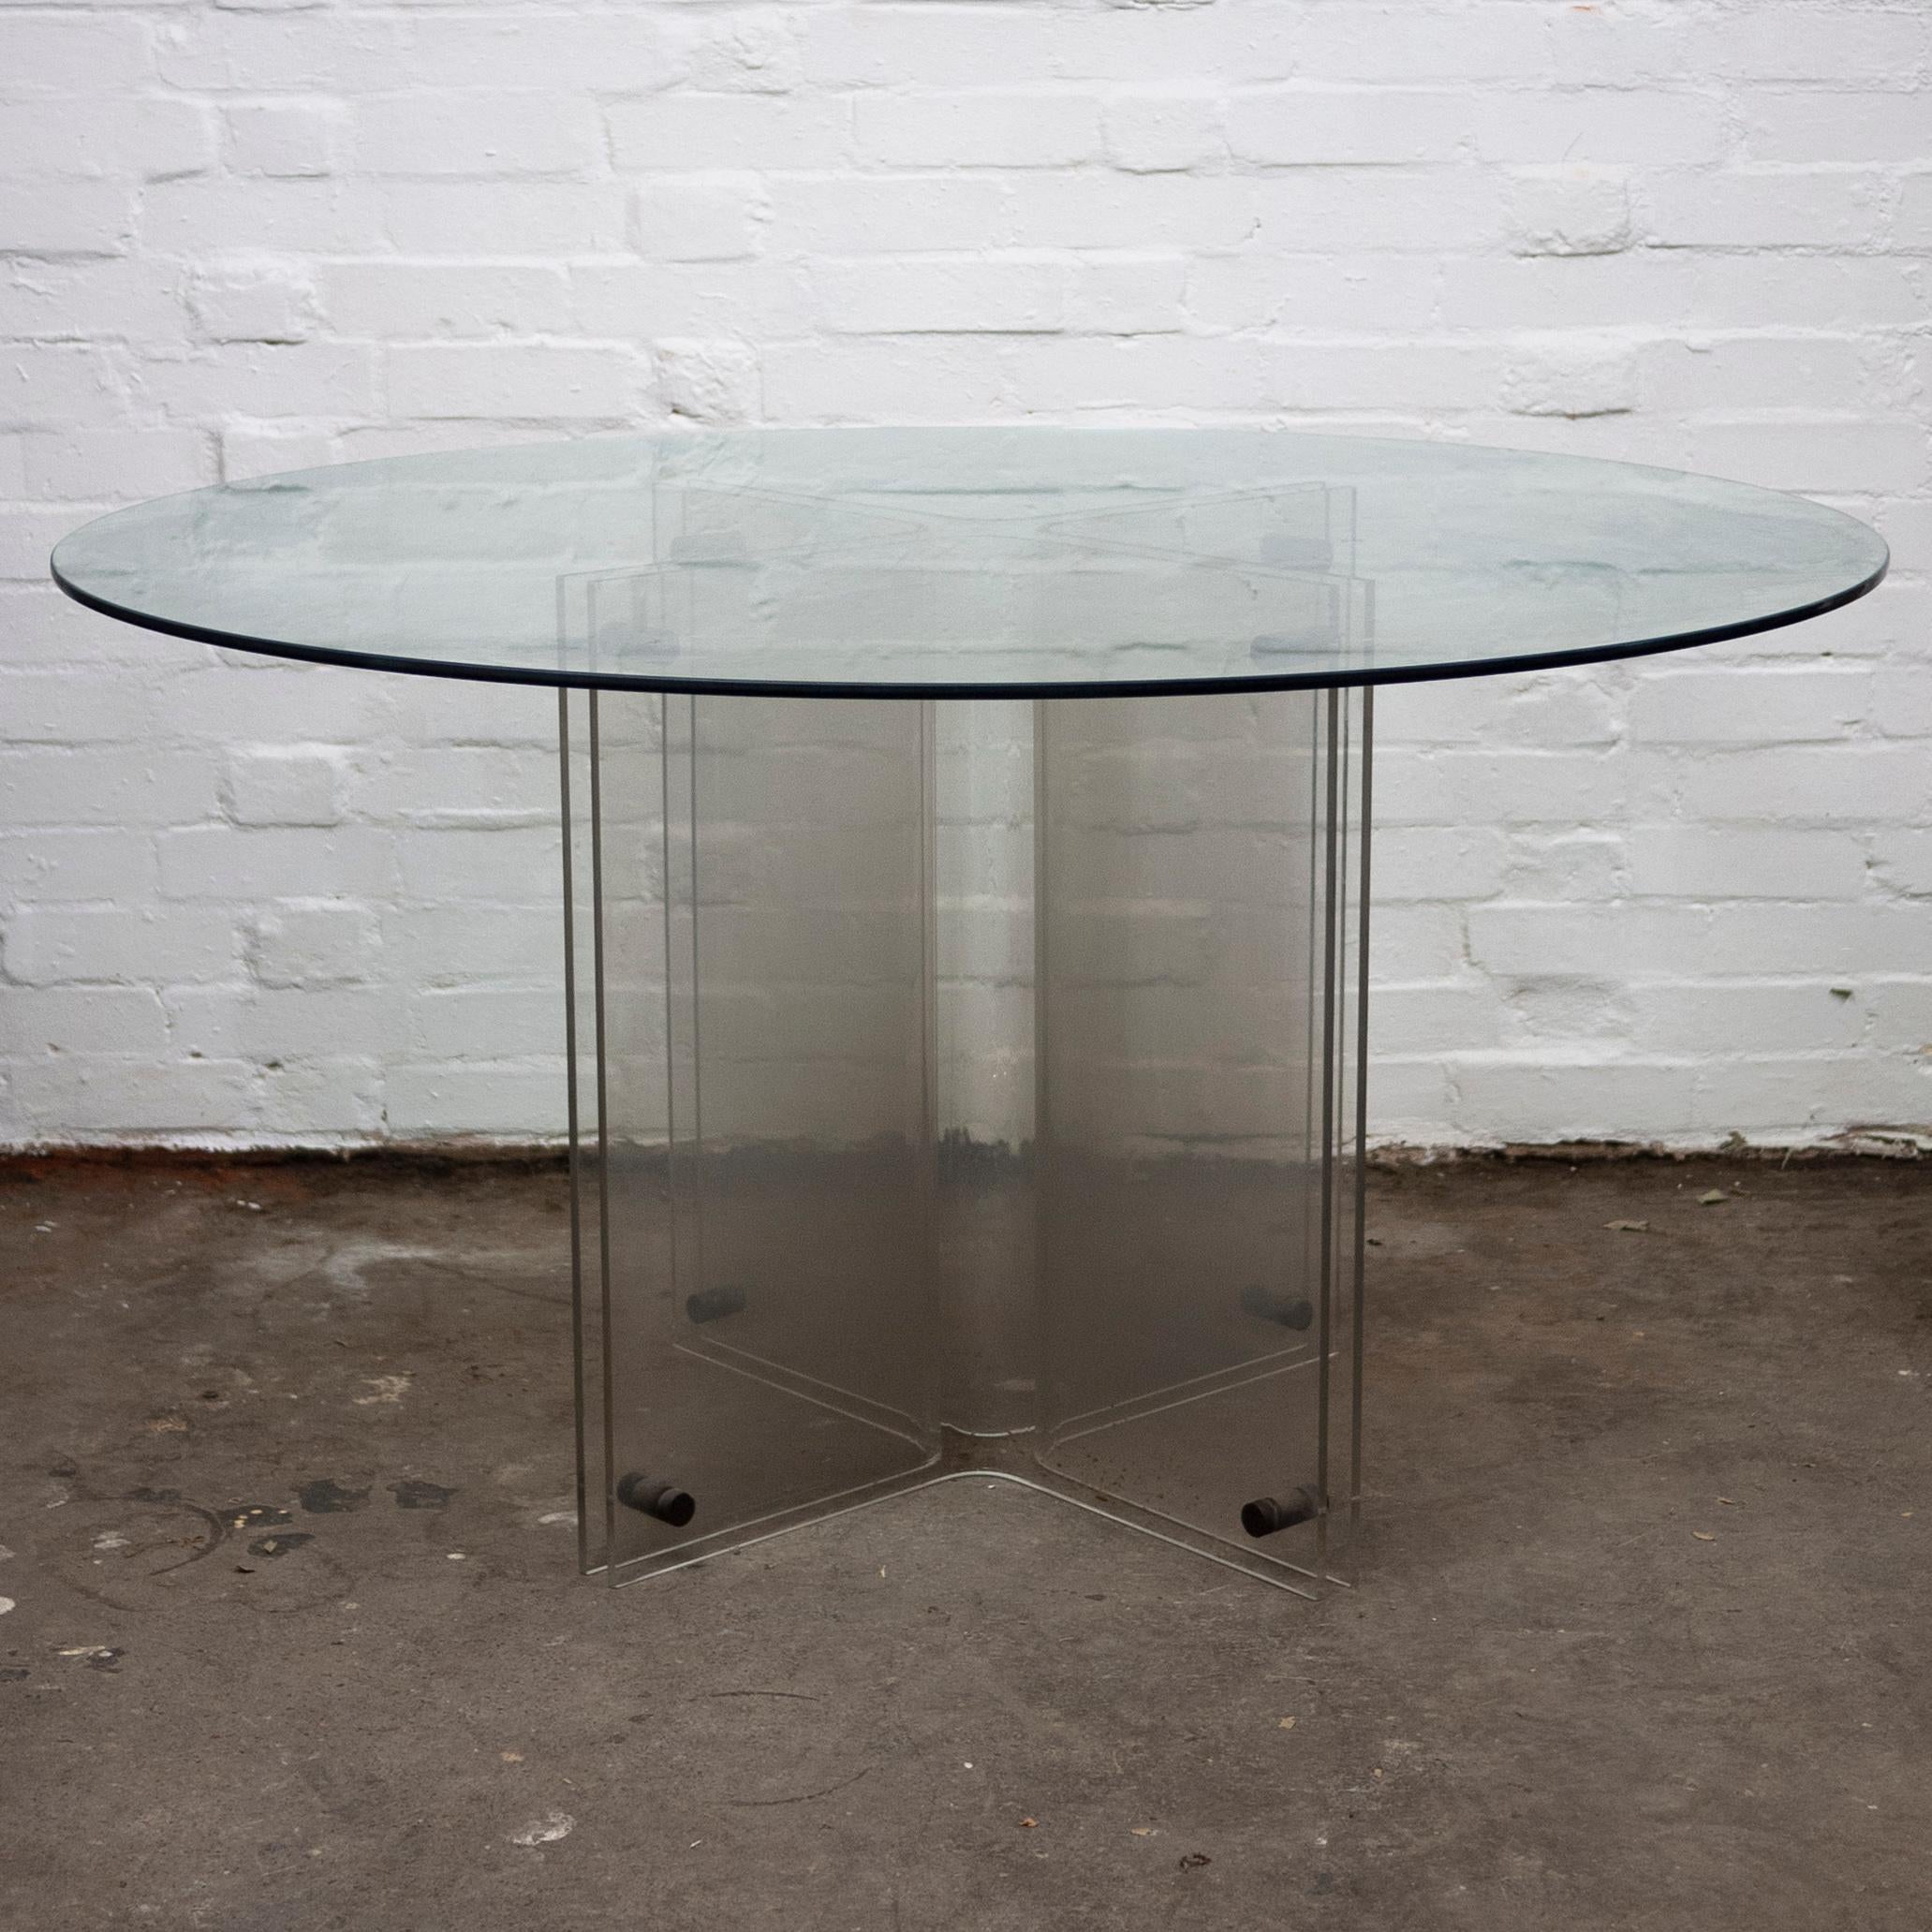 Vintage Hollywood Regency Lucite and Glass Round Dining Table, 1980s For Sale 4